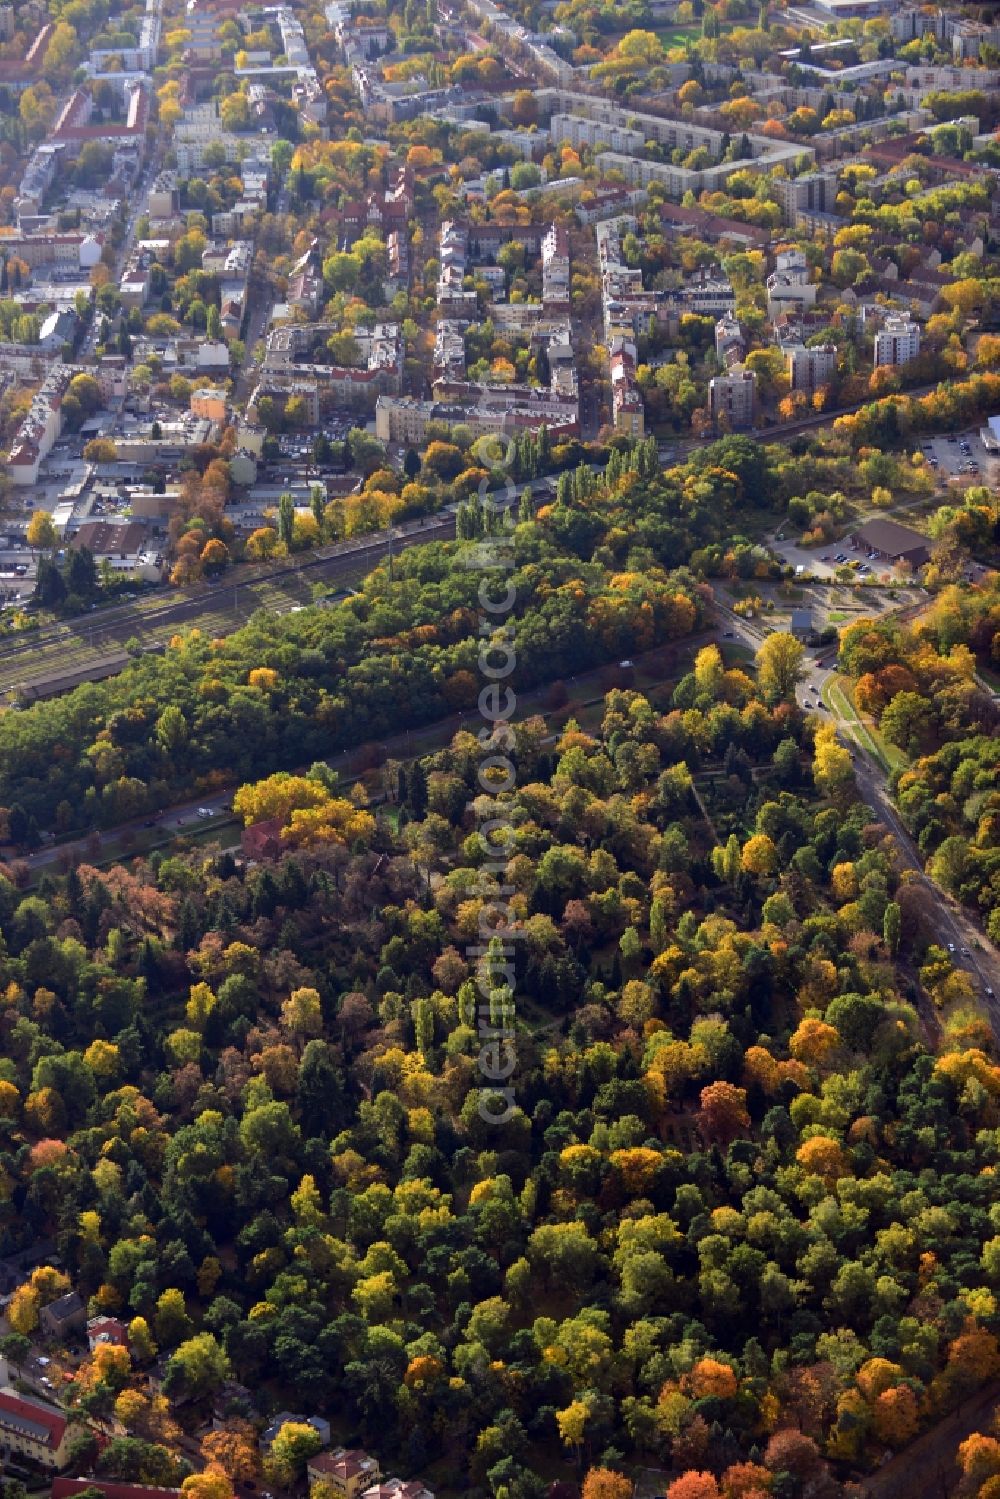 Berlin from above - Overlooking autumn colored treetops at the railway station Schoenholz with a view of residential areas on the border of the districts Pankow and Reinickendorf in Berlin